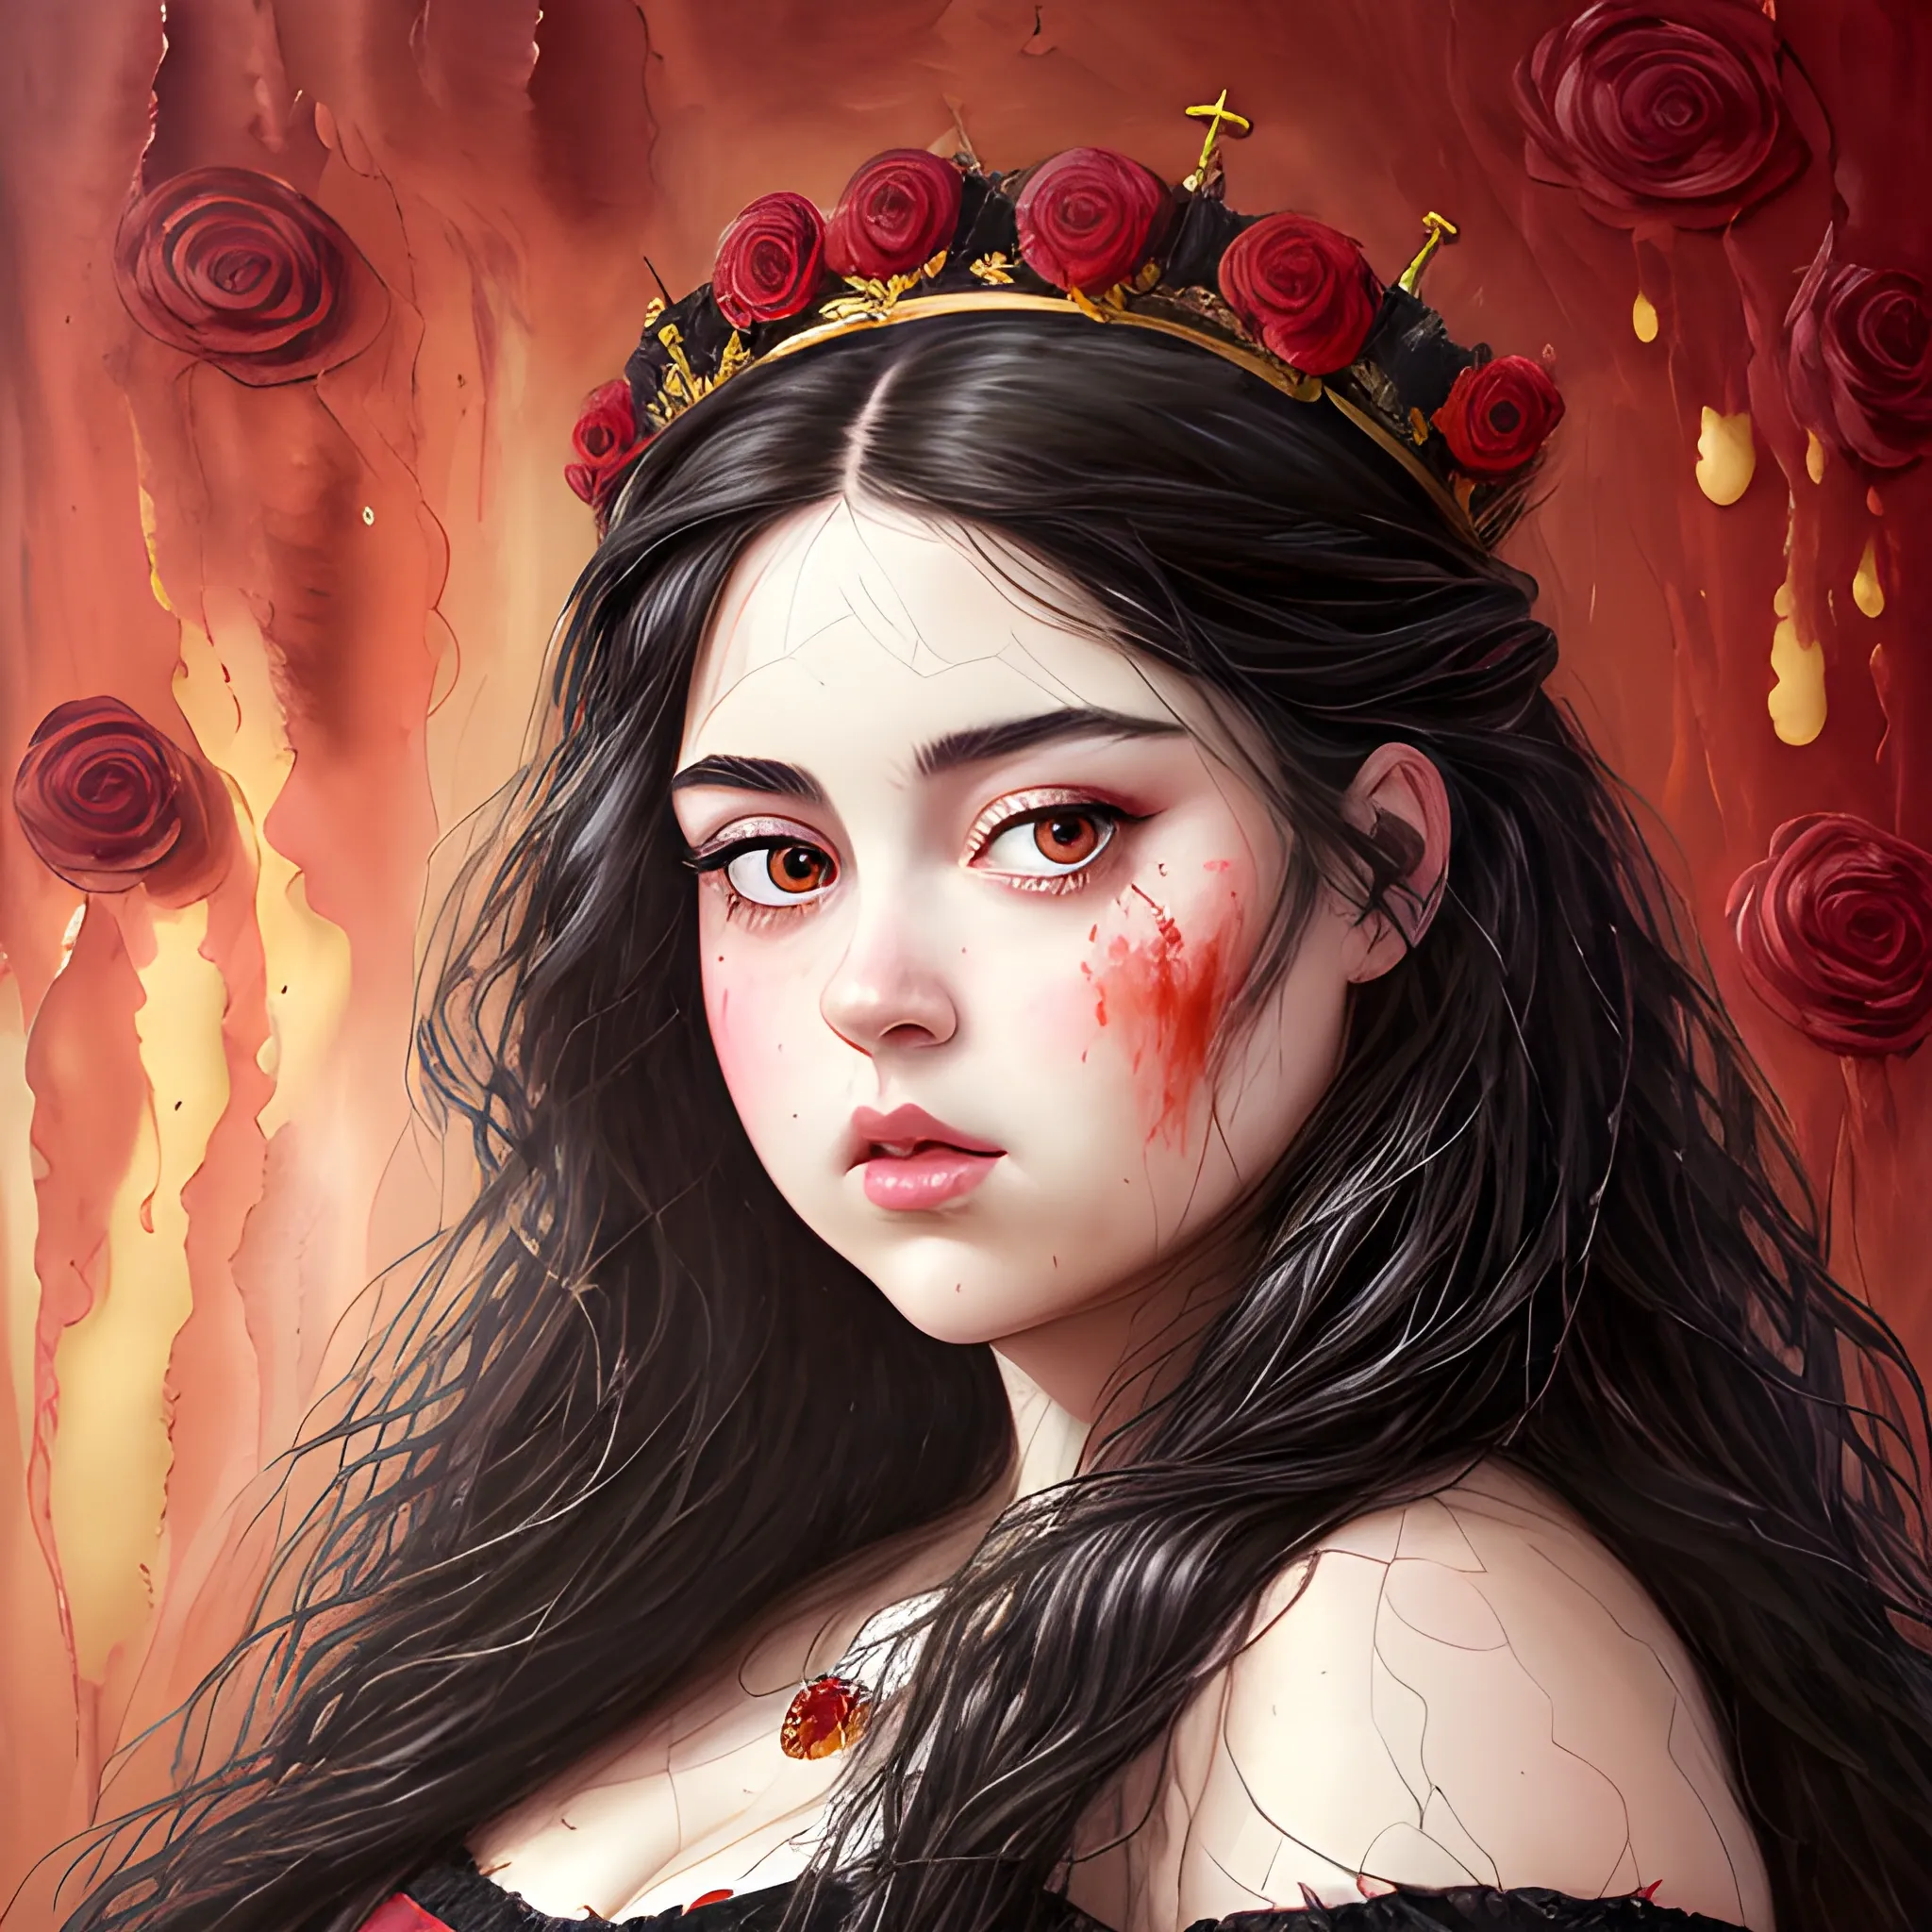 (((high detail))), best quality, Warm Colors, (detailed), (high resolution)Black long-haired female adult, full body, curvy face, with rosy cheeks, big black eyes, thick eyelashes, thick peach lips, thick eyebrows,  with a black and red dress, roses of backround  
holding a bloody crown in her hand, wallper , Oil Painting,  Water Color